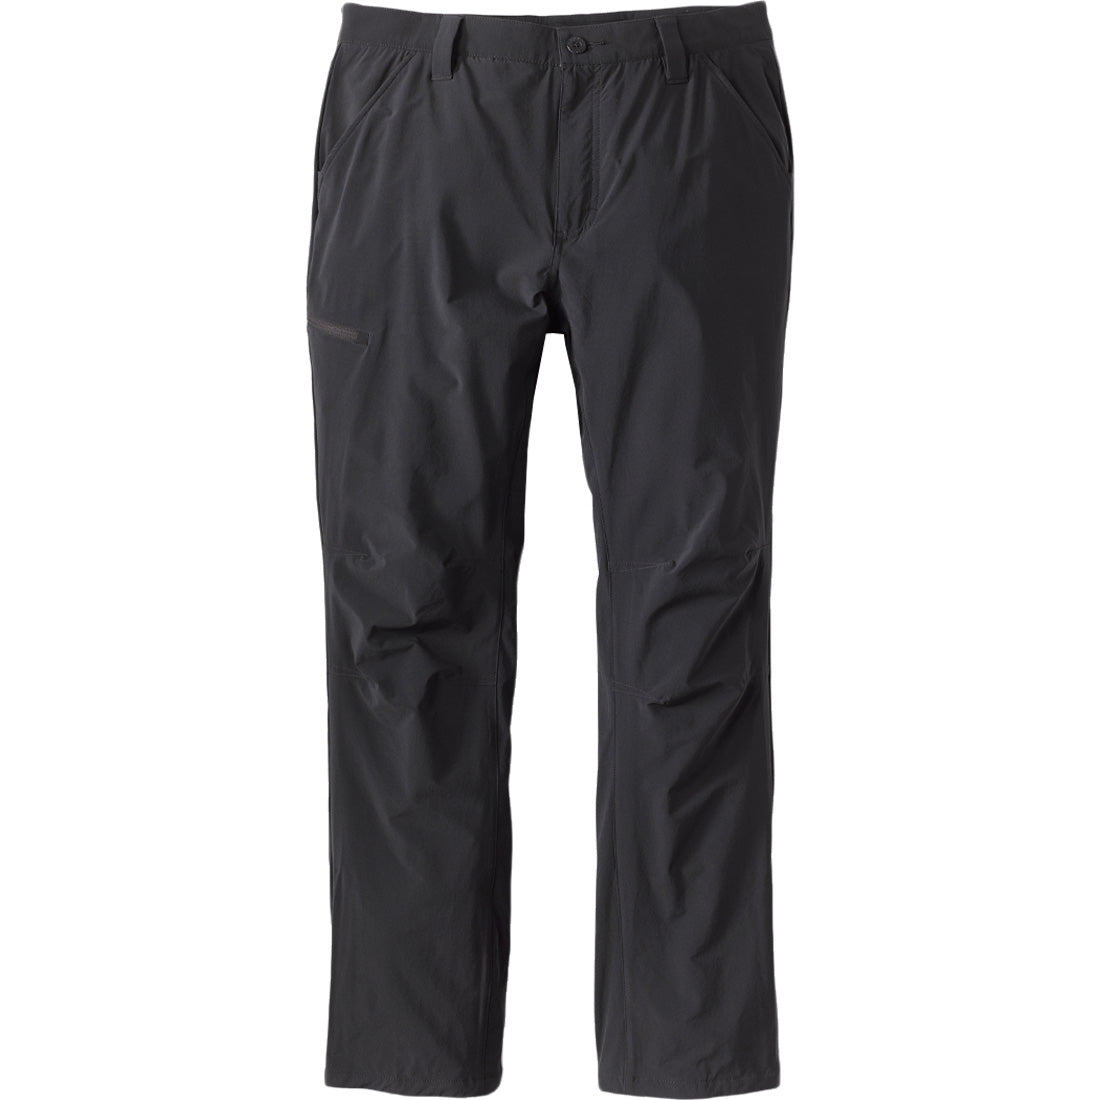 Orvis Recycled Warm Jackson Quick Dry Pant - Men's